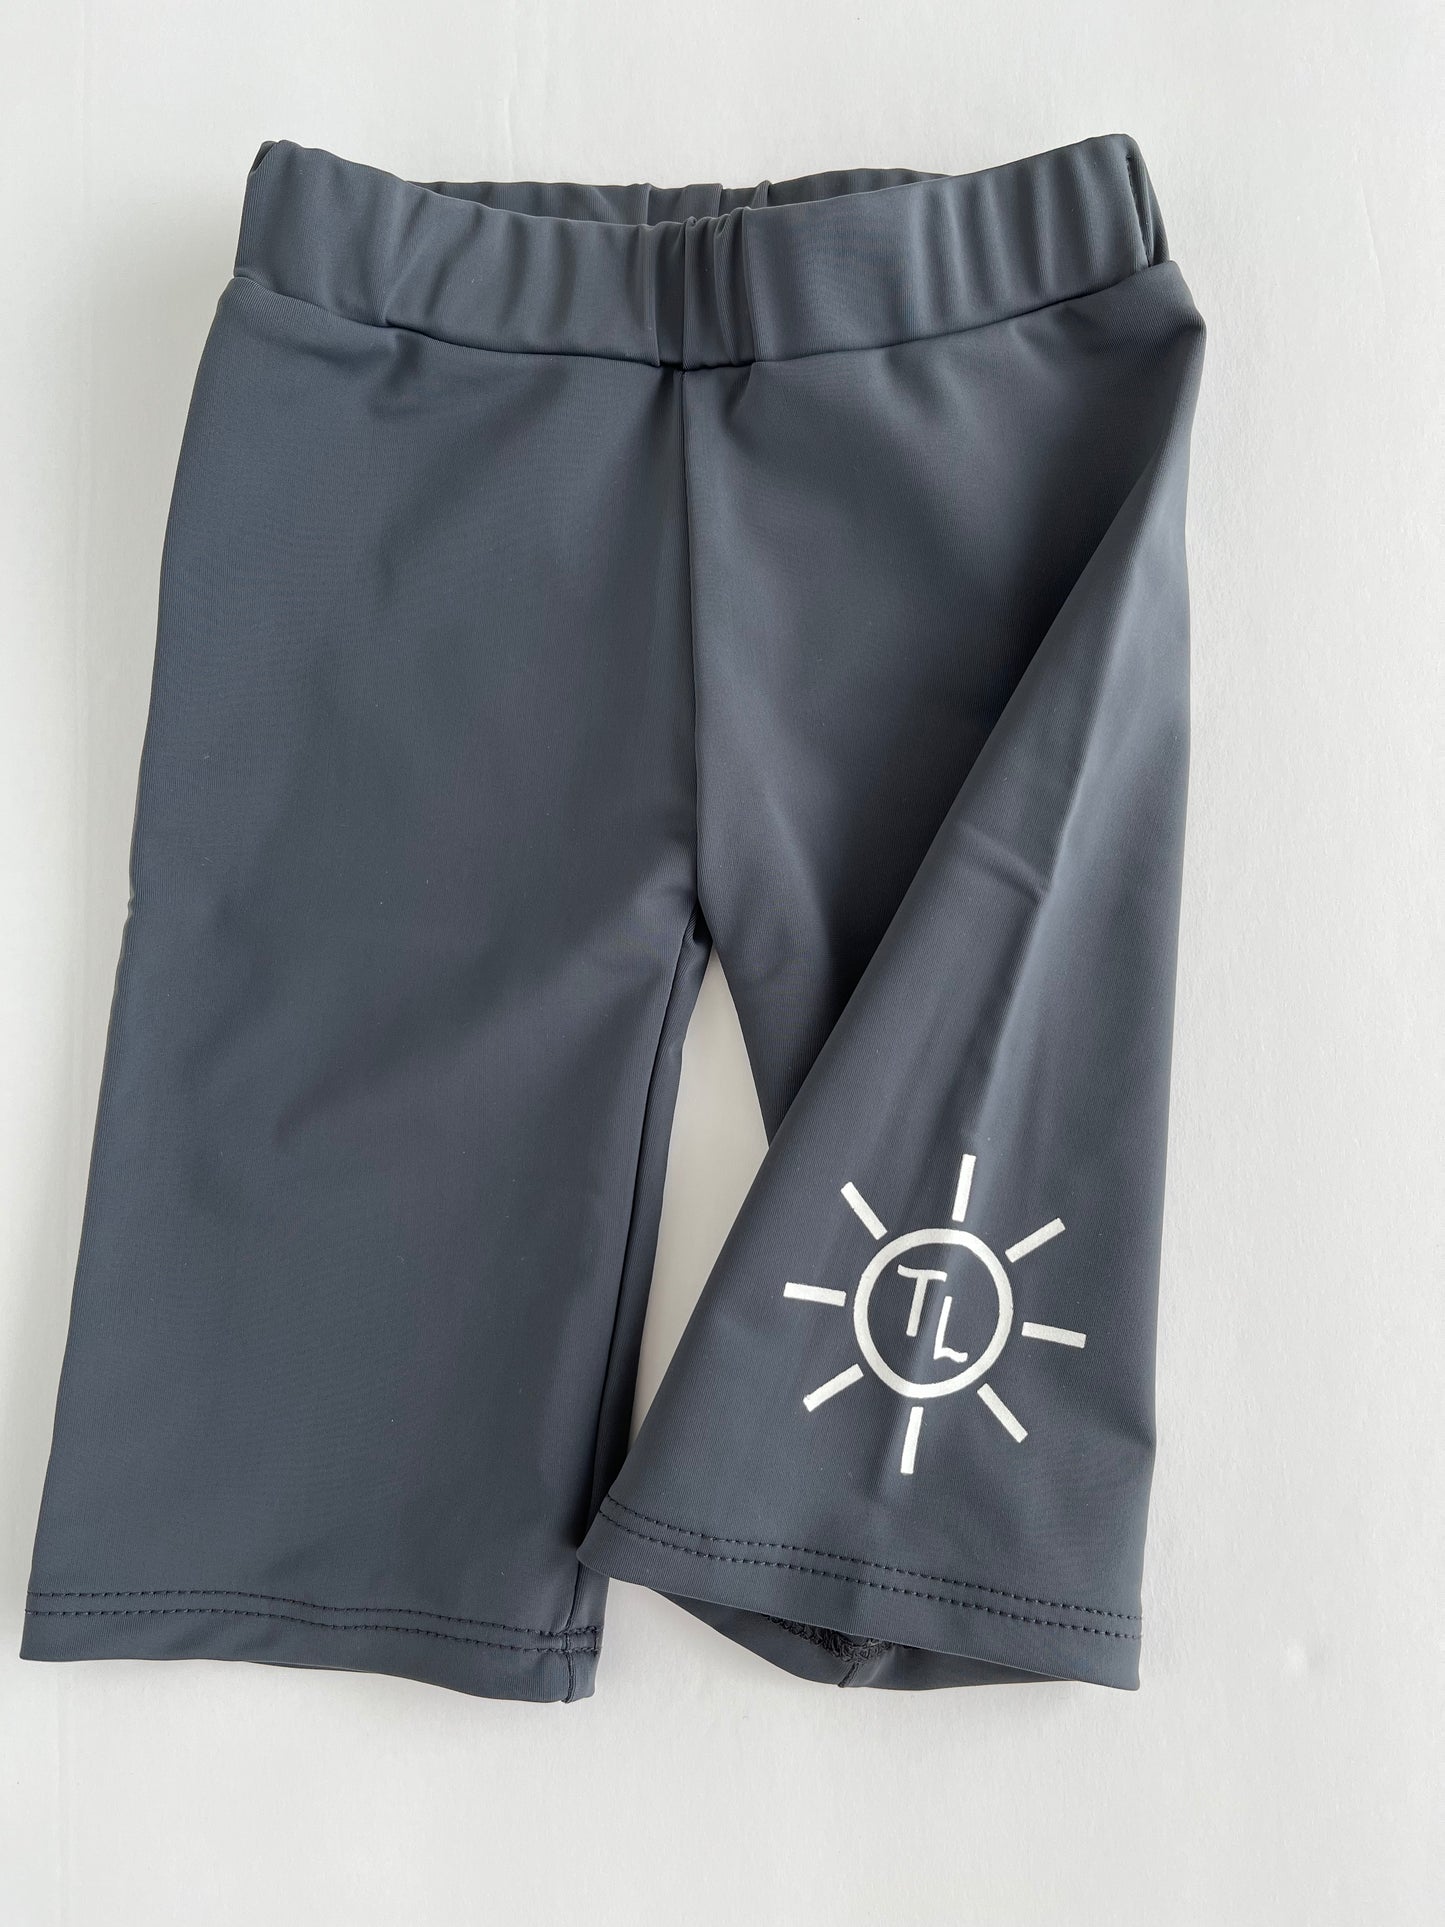 UPF 50+ swimwear and sun protective shorts quality children's sun protective clothing Canada